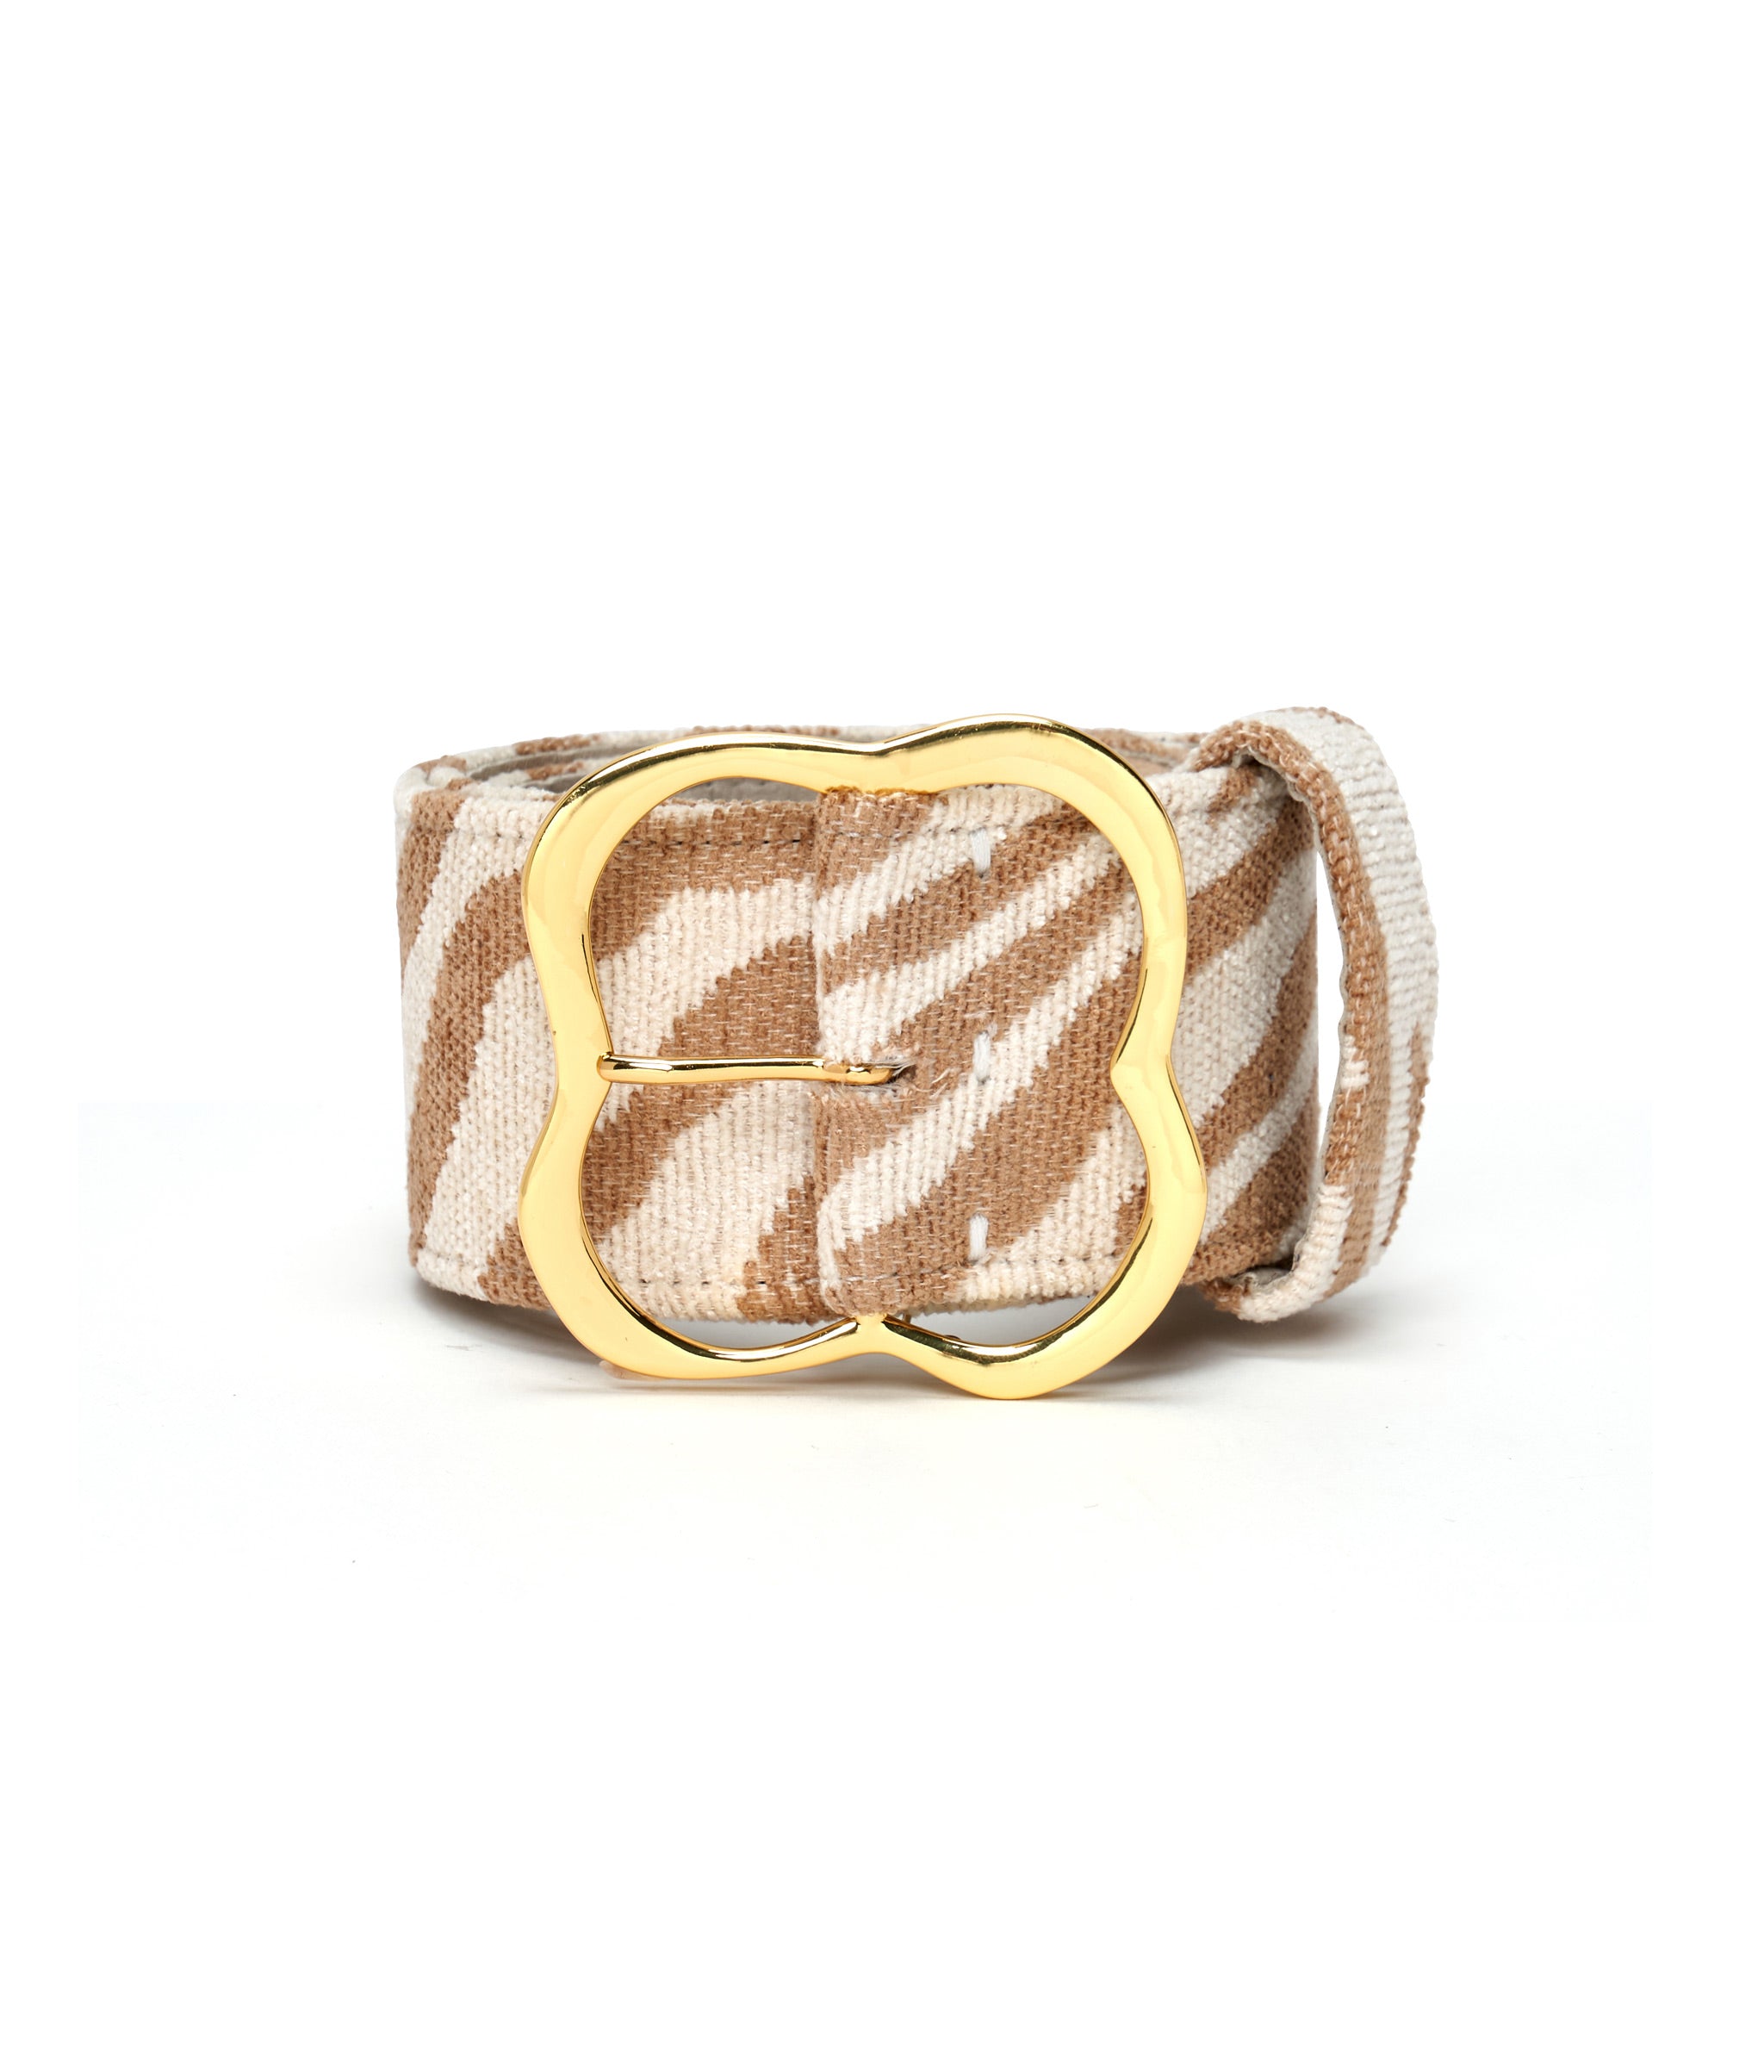 Florence Belt in Sand Tiger. Wide belt in cream-and-sand tiger print chenille, with gold clover-inspired buckle.